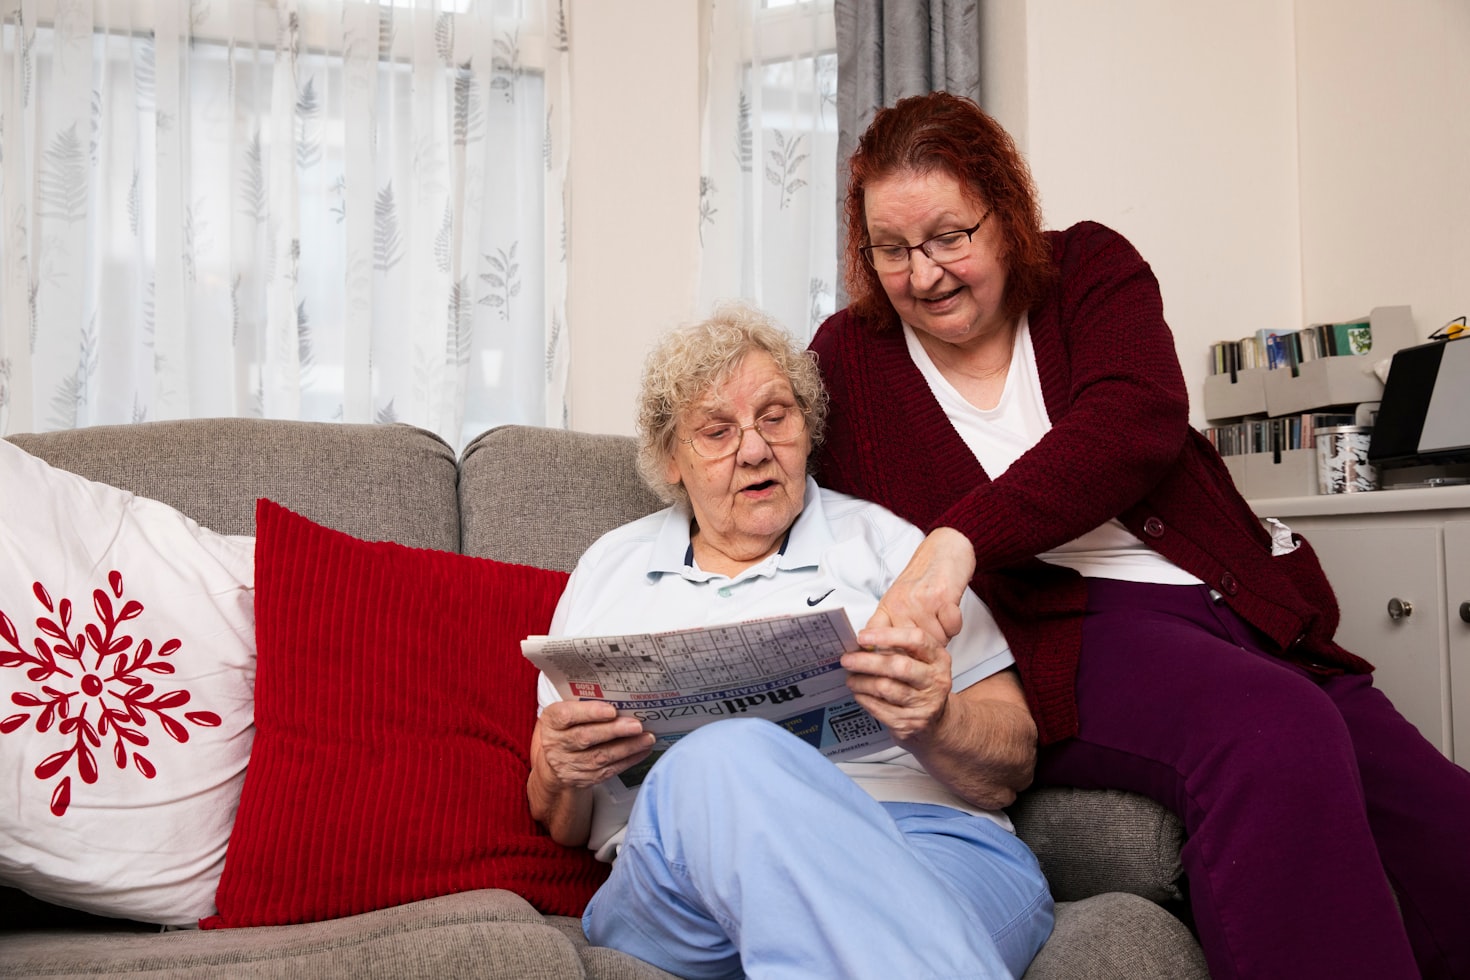 Two elderly women sitting on a couch reading a newspaper.